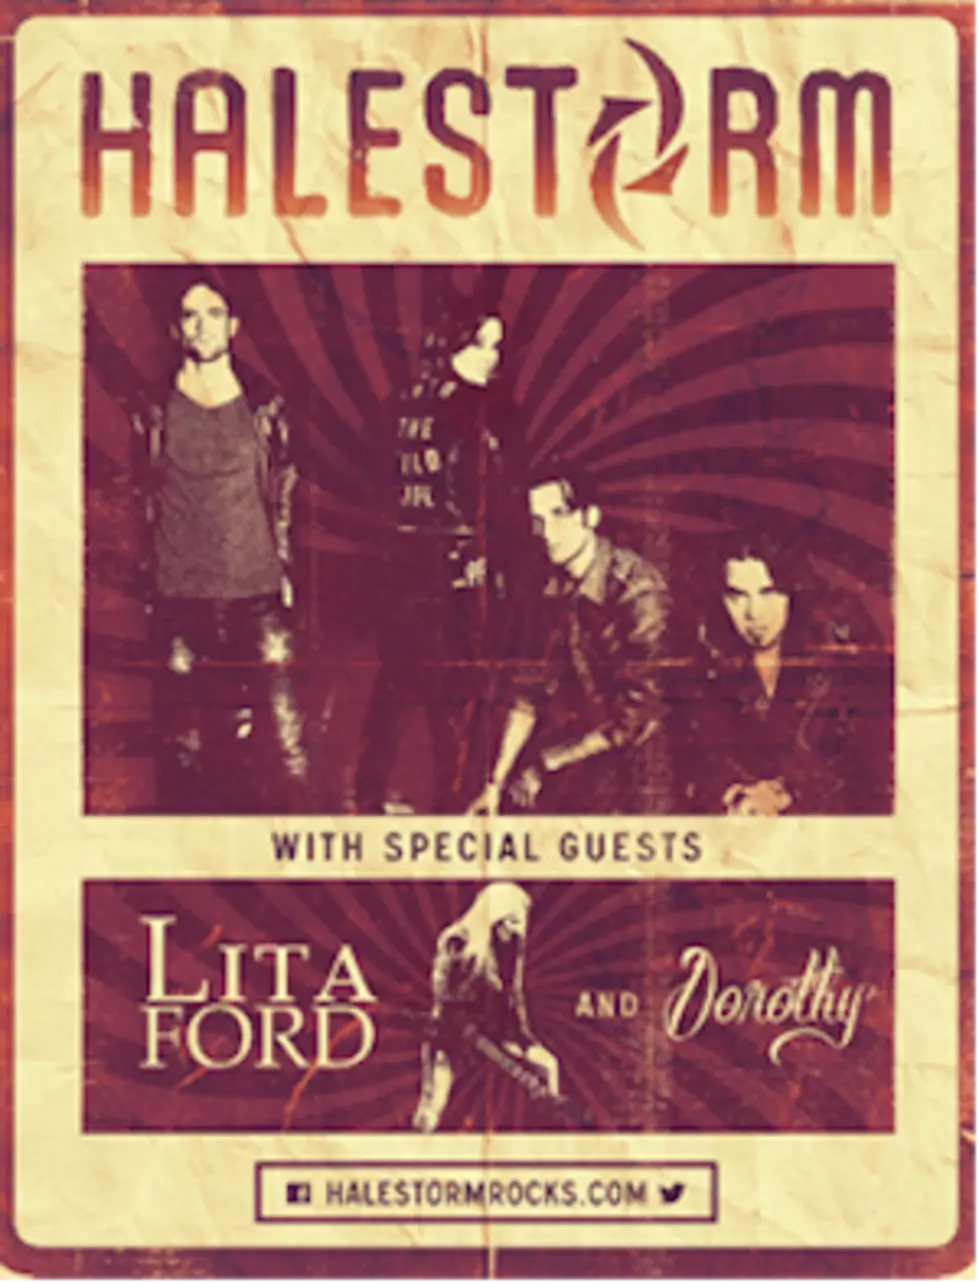 Halestorm Reunite With Lita Ford + Dorothy for Fall 2016 North American Tour